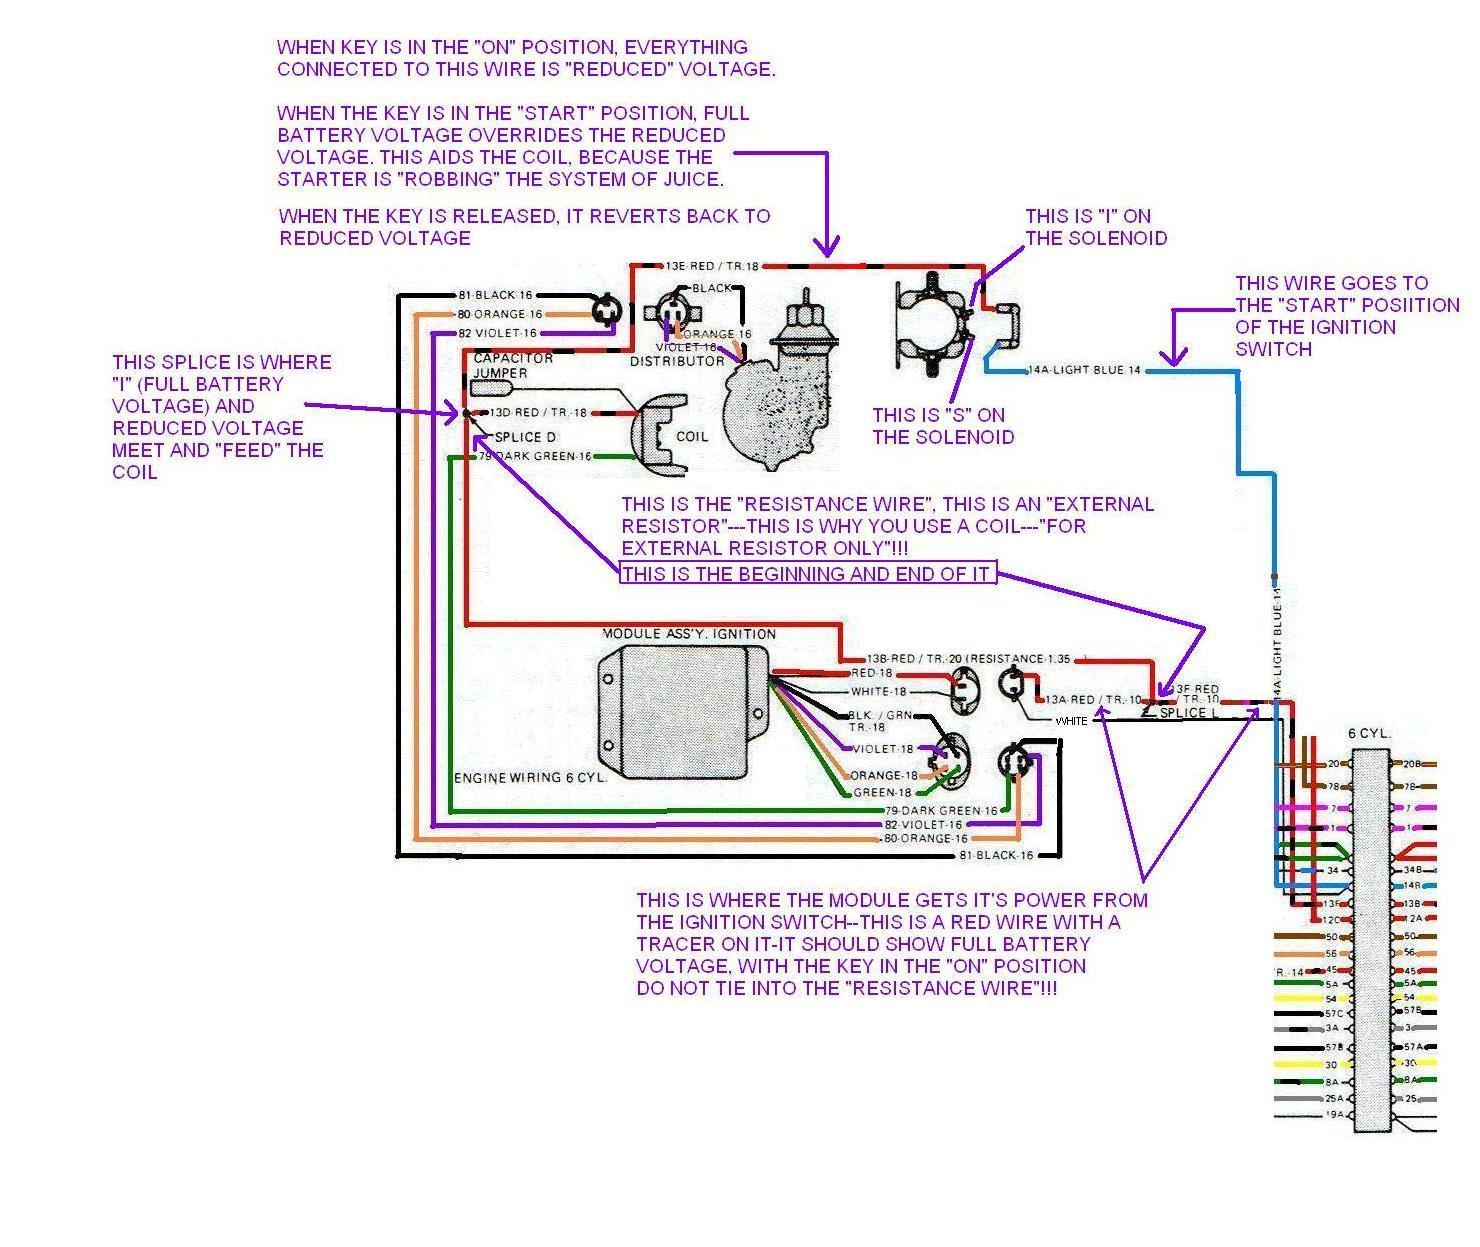 Engine Wiring: I Need a Good Copy of the Wiring for a 1979 CJ5